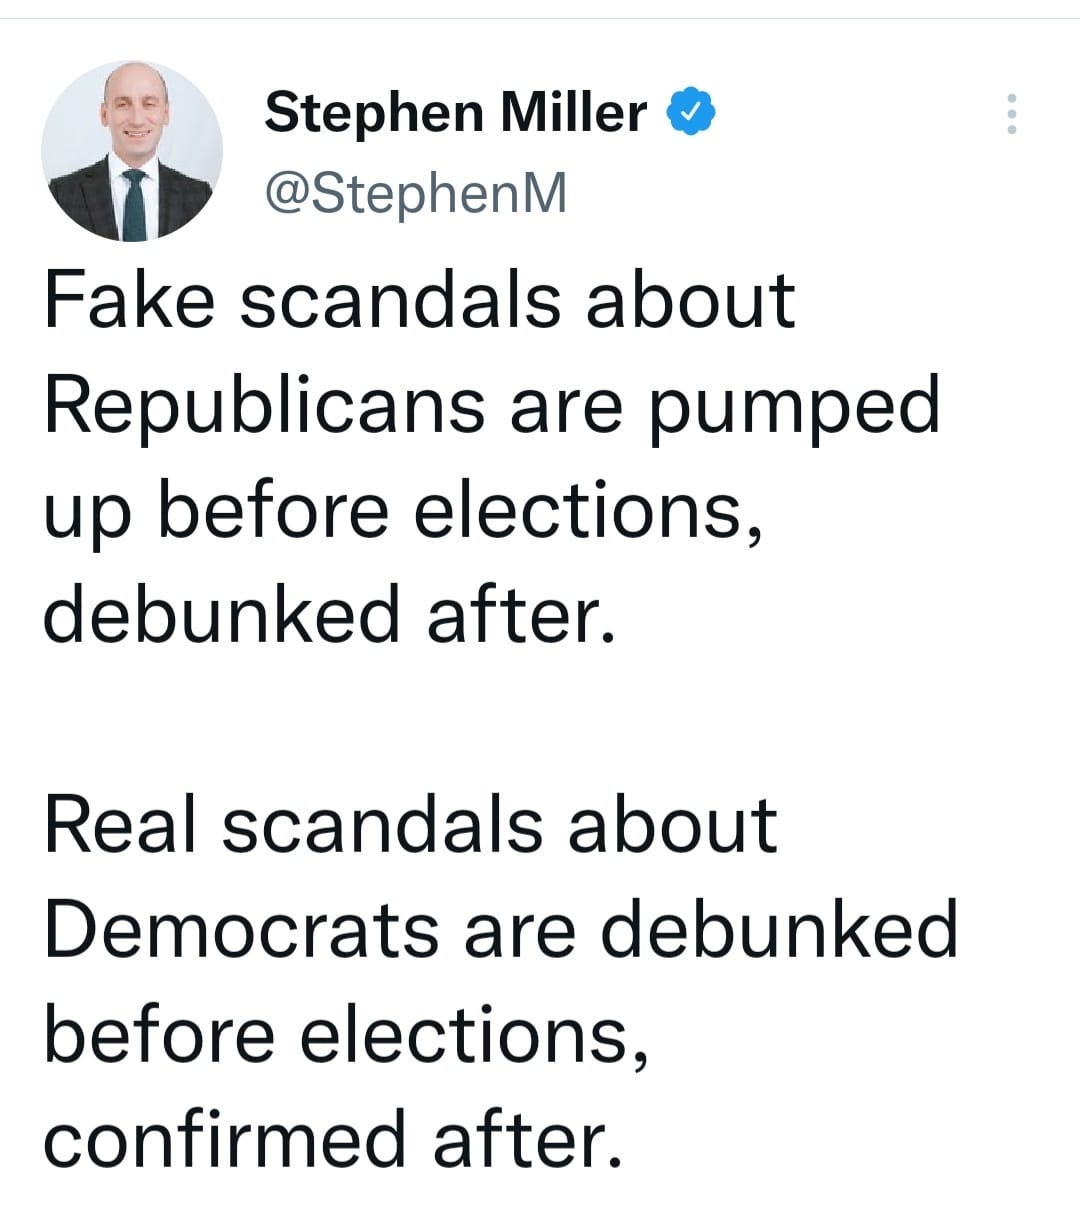 May be a Twitter screenshot of 1 person and text that says 'Stephen Miller @StephenM Fake scandals about Republicans are pumped up before elections, debunked after. Real scandals about Democrats are debunked before elections, confirmed after.'